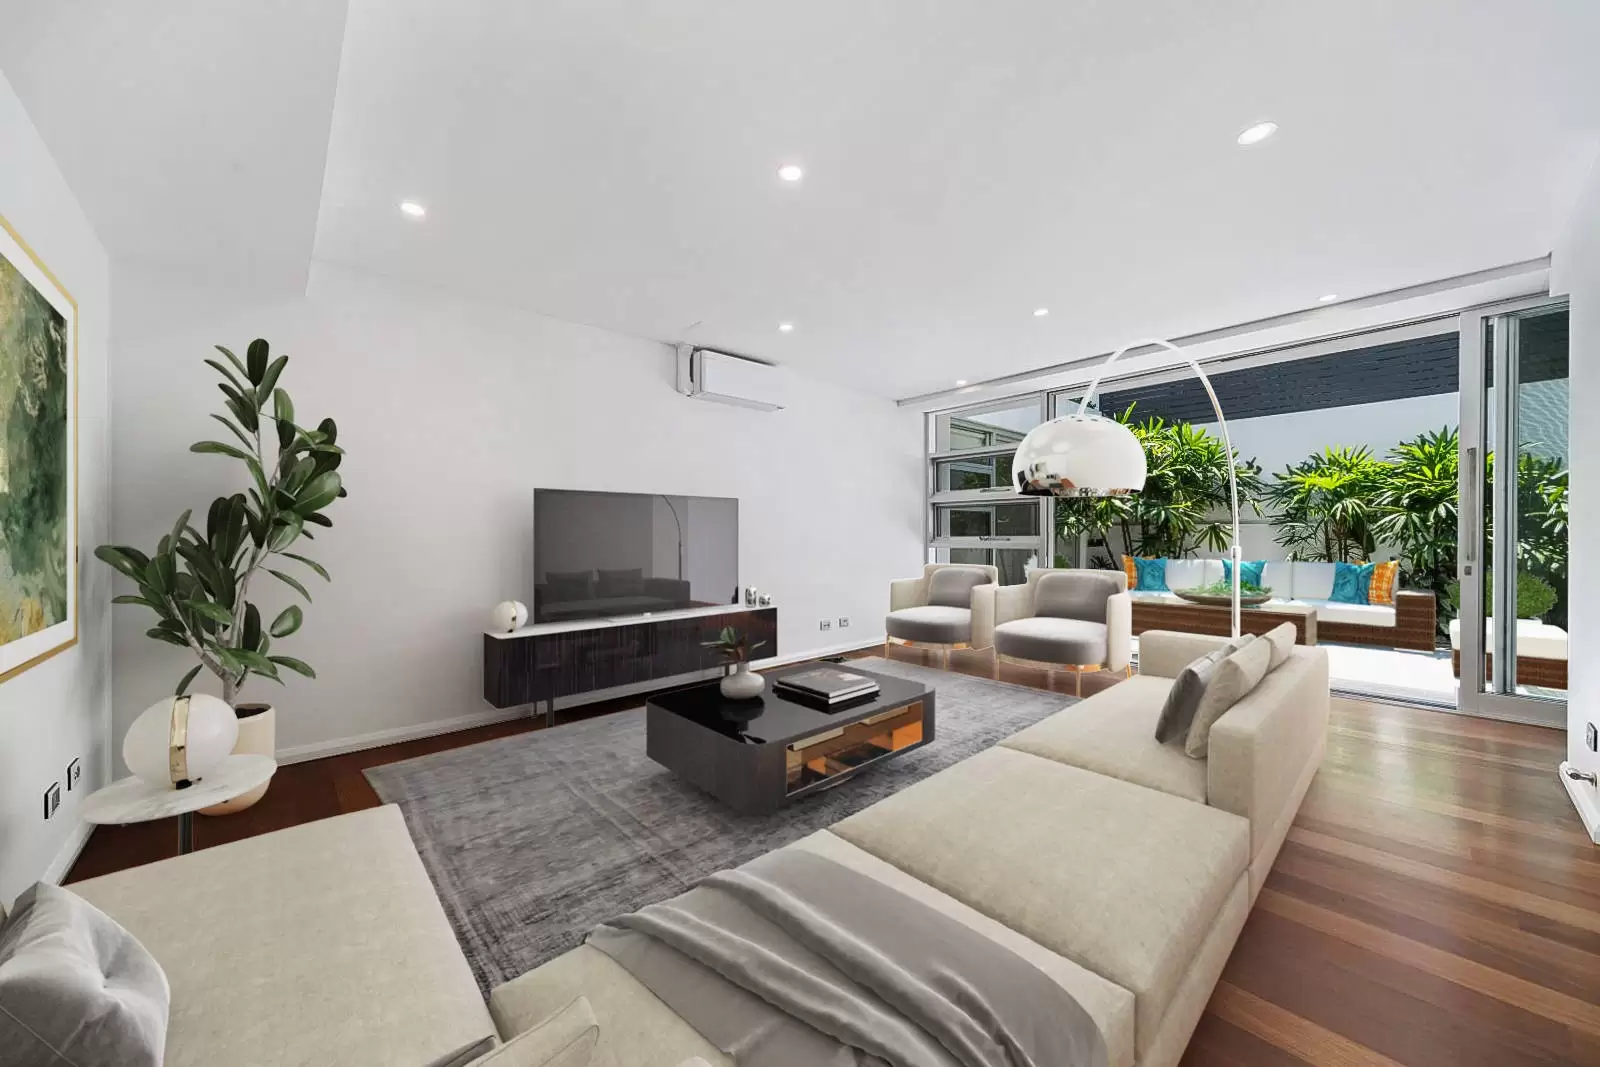 29A Pauling Avenue, Coogee Leased by Sydney Sotheby's International Realty - image 3